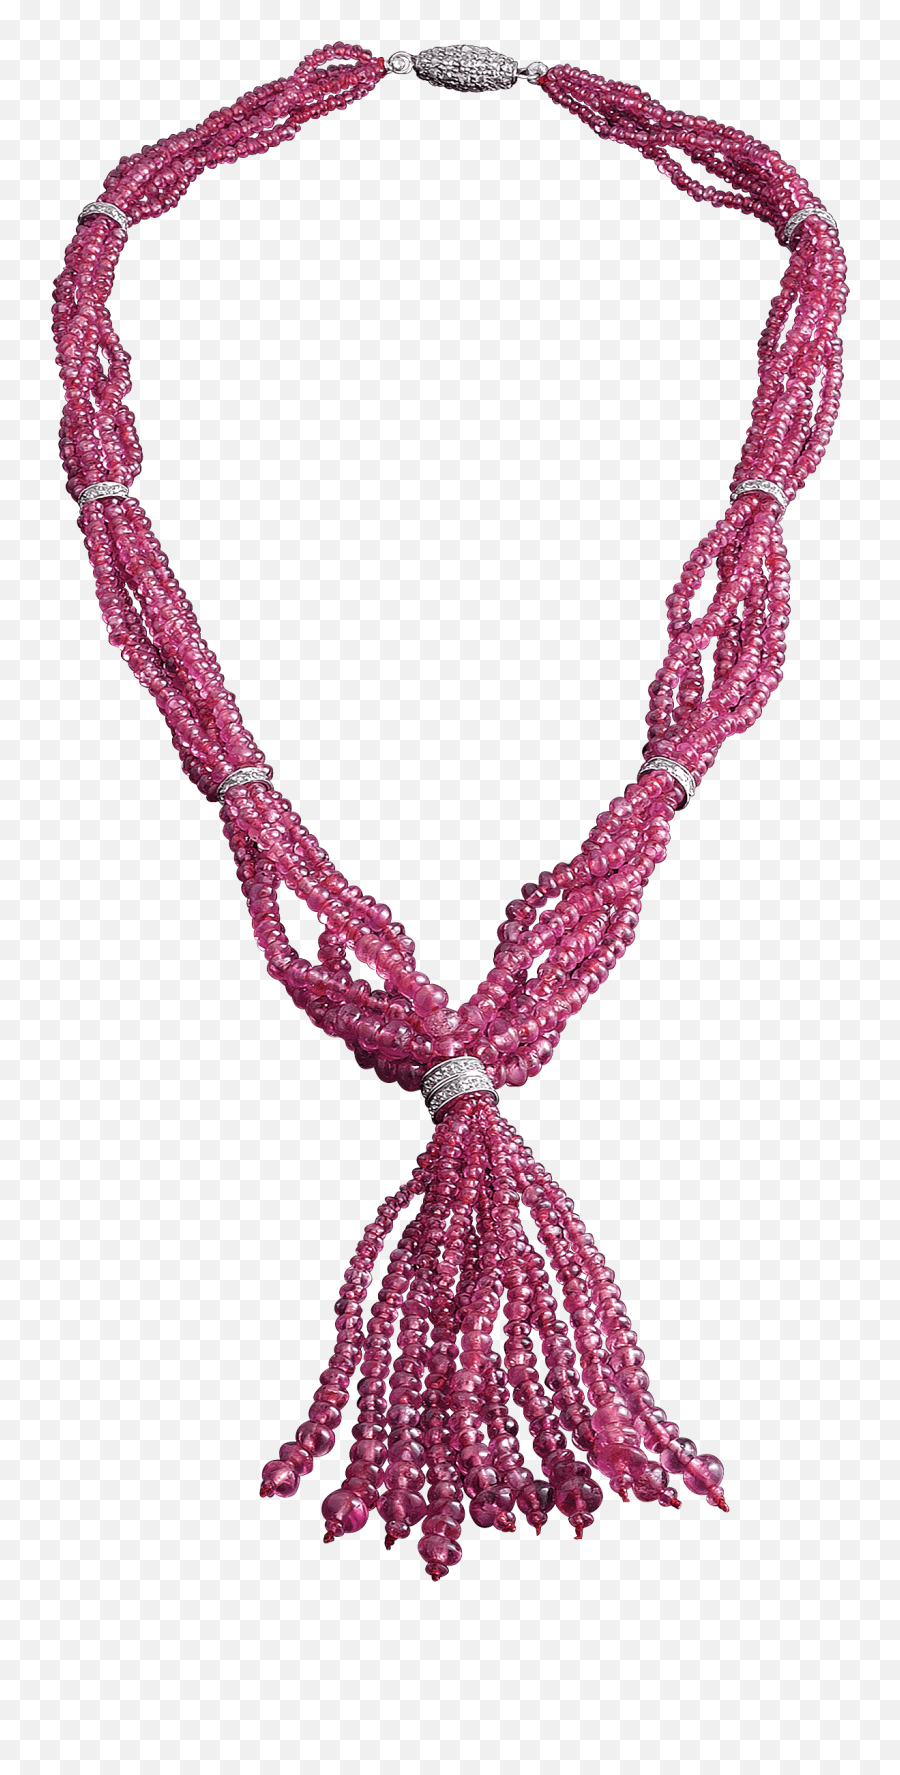 Download Ruby Tassel Necklace - Scarf Png Image With No Solid,Tassel Png